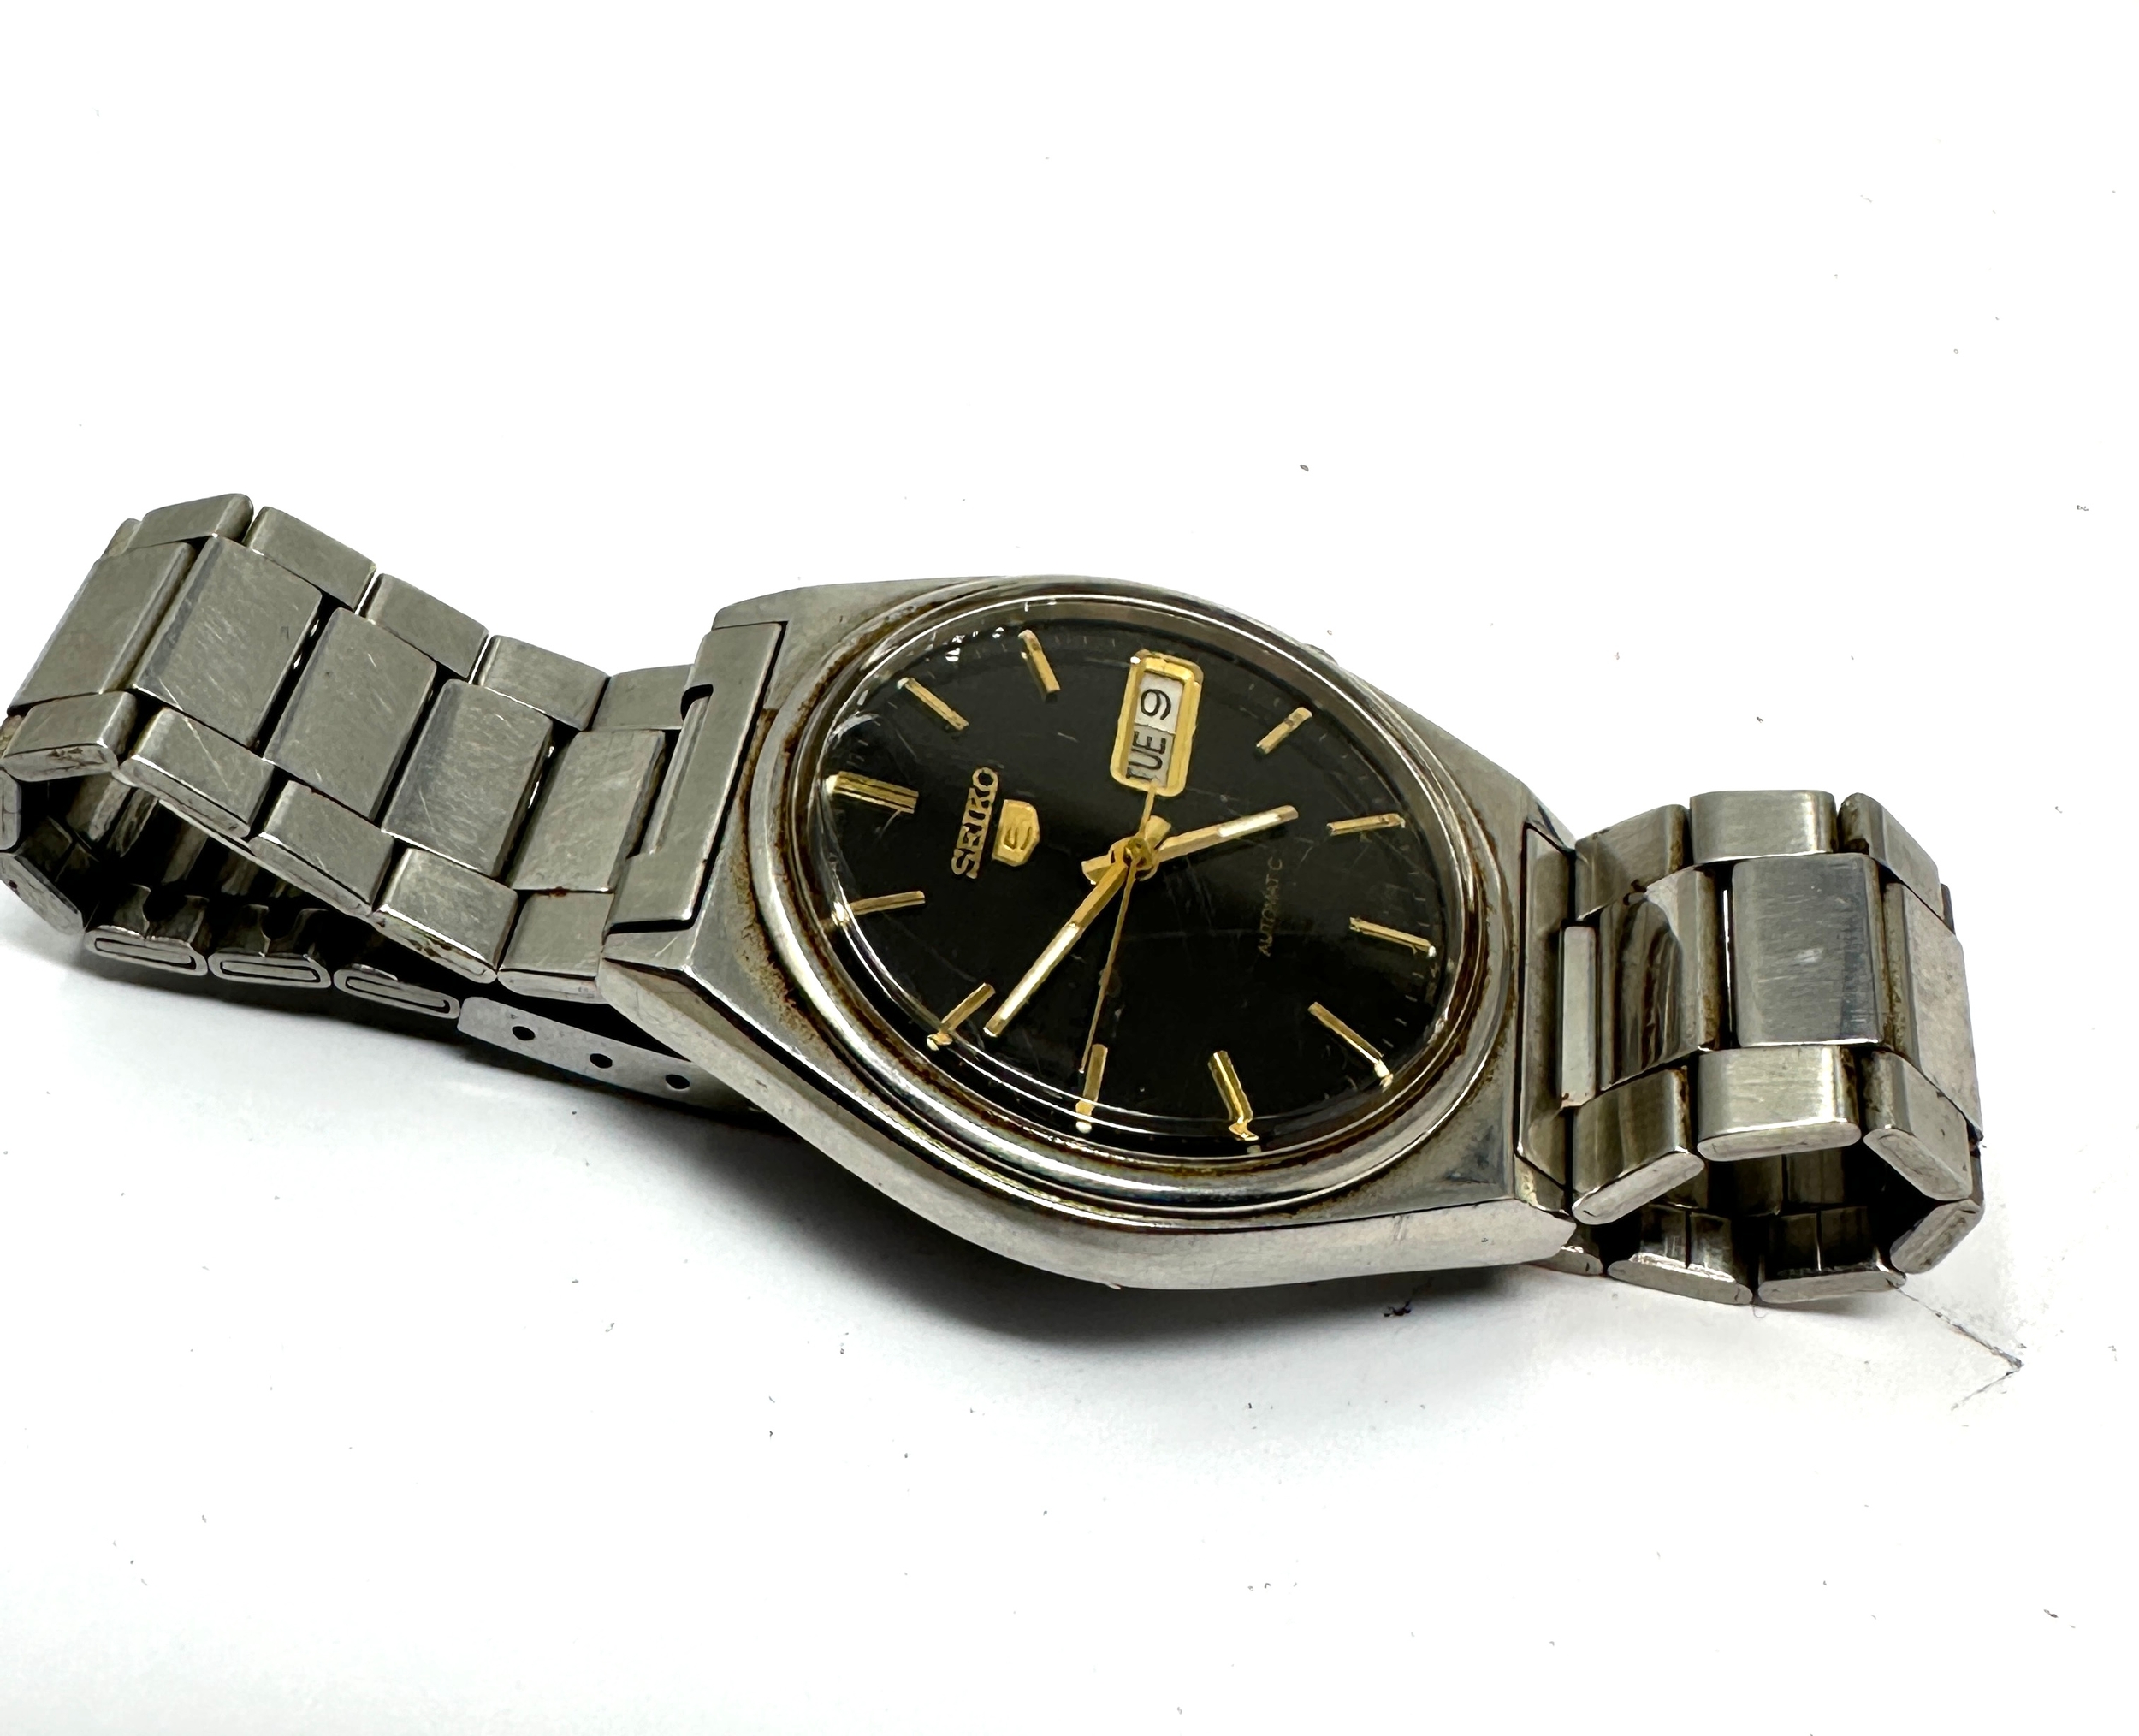 Vintage Seiko 5 Automatic Day & Date 7009 -3140 the watch is ticking black dial - Image 3 of 5